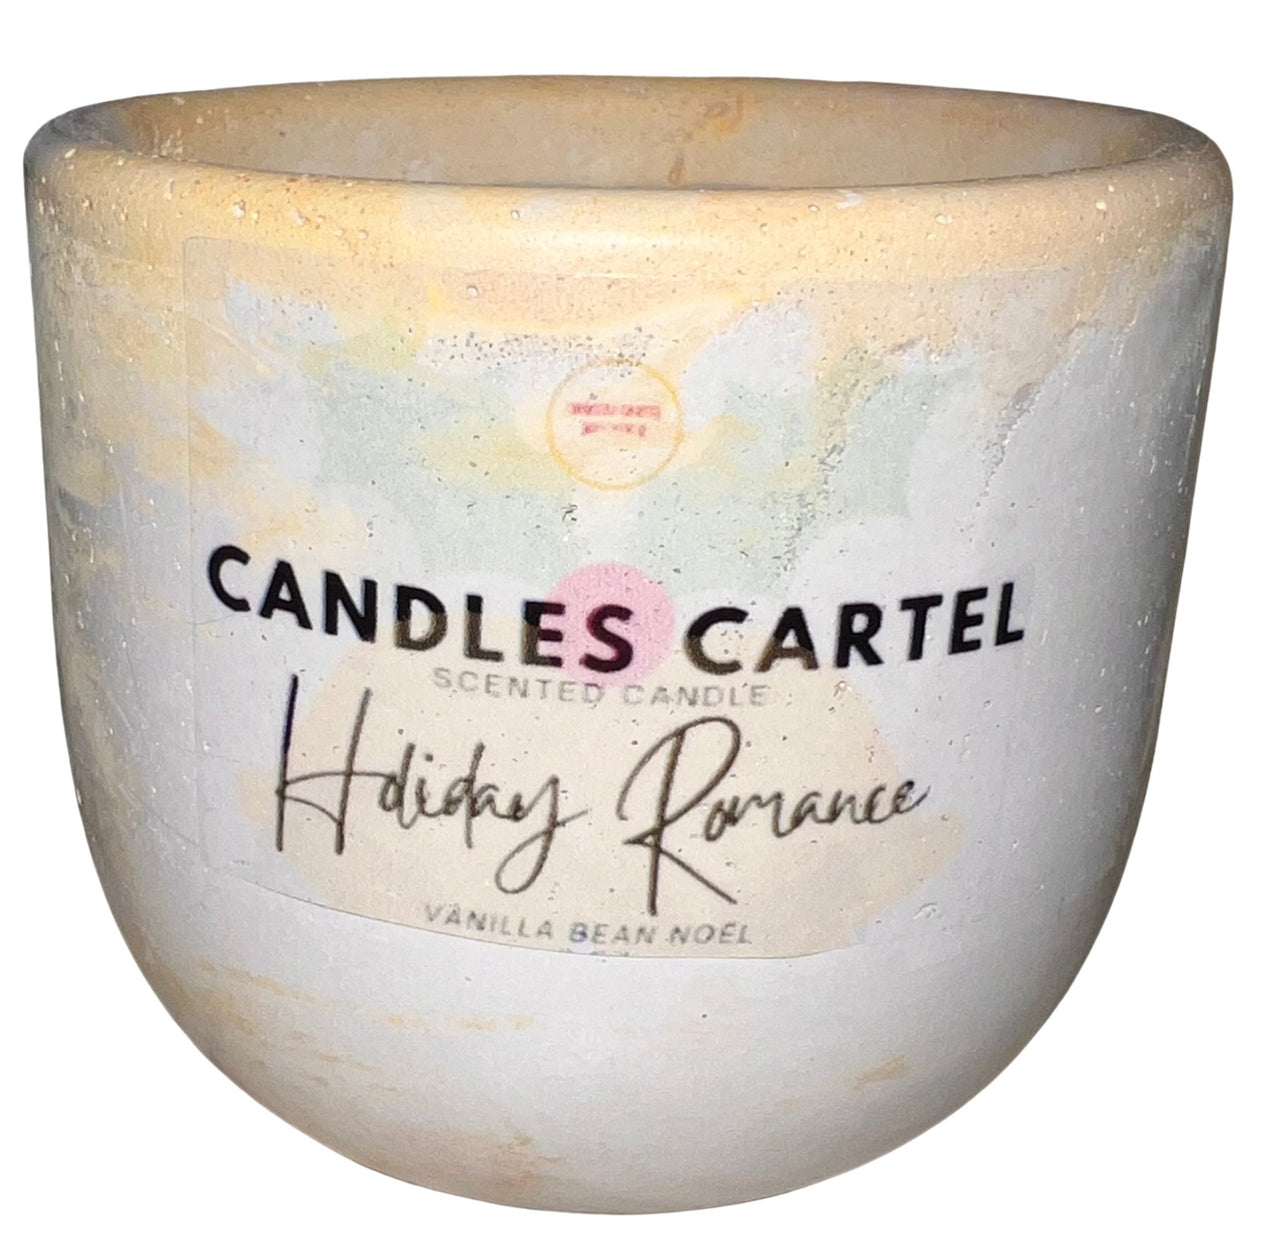 Holiday Romance Candle 10 oz Coconut Wax With Custom Acrylic Gold Swirl on Concrete Vessel And Crackling Wooden Wick